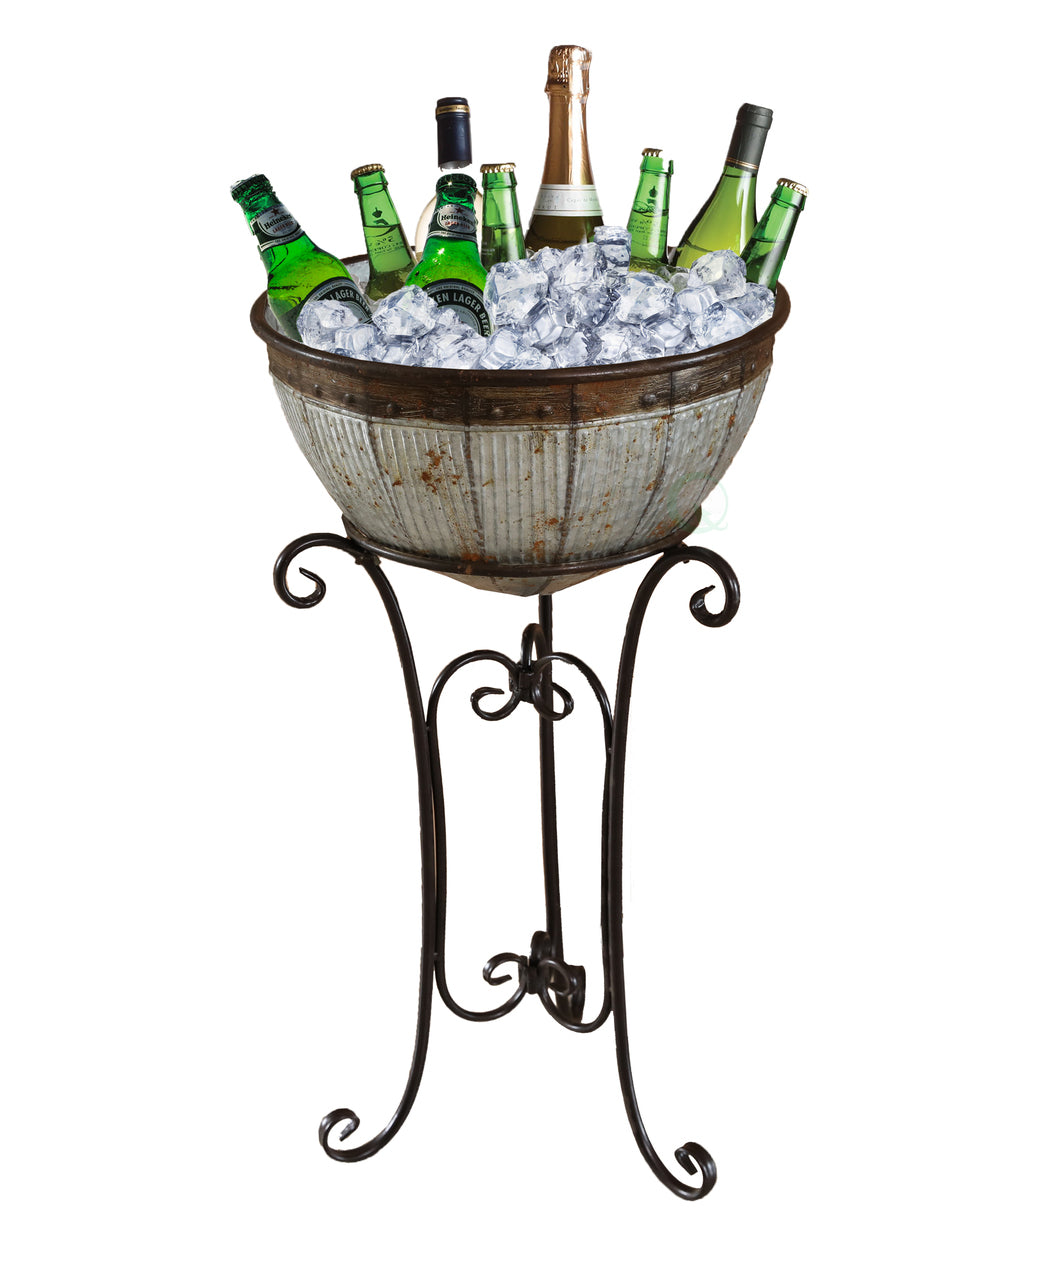 Galvanized Metal Beverage Cooler Tub with Stand QI003289-Wine Bottle Holders-The Wine Cooler Club